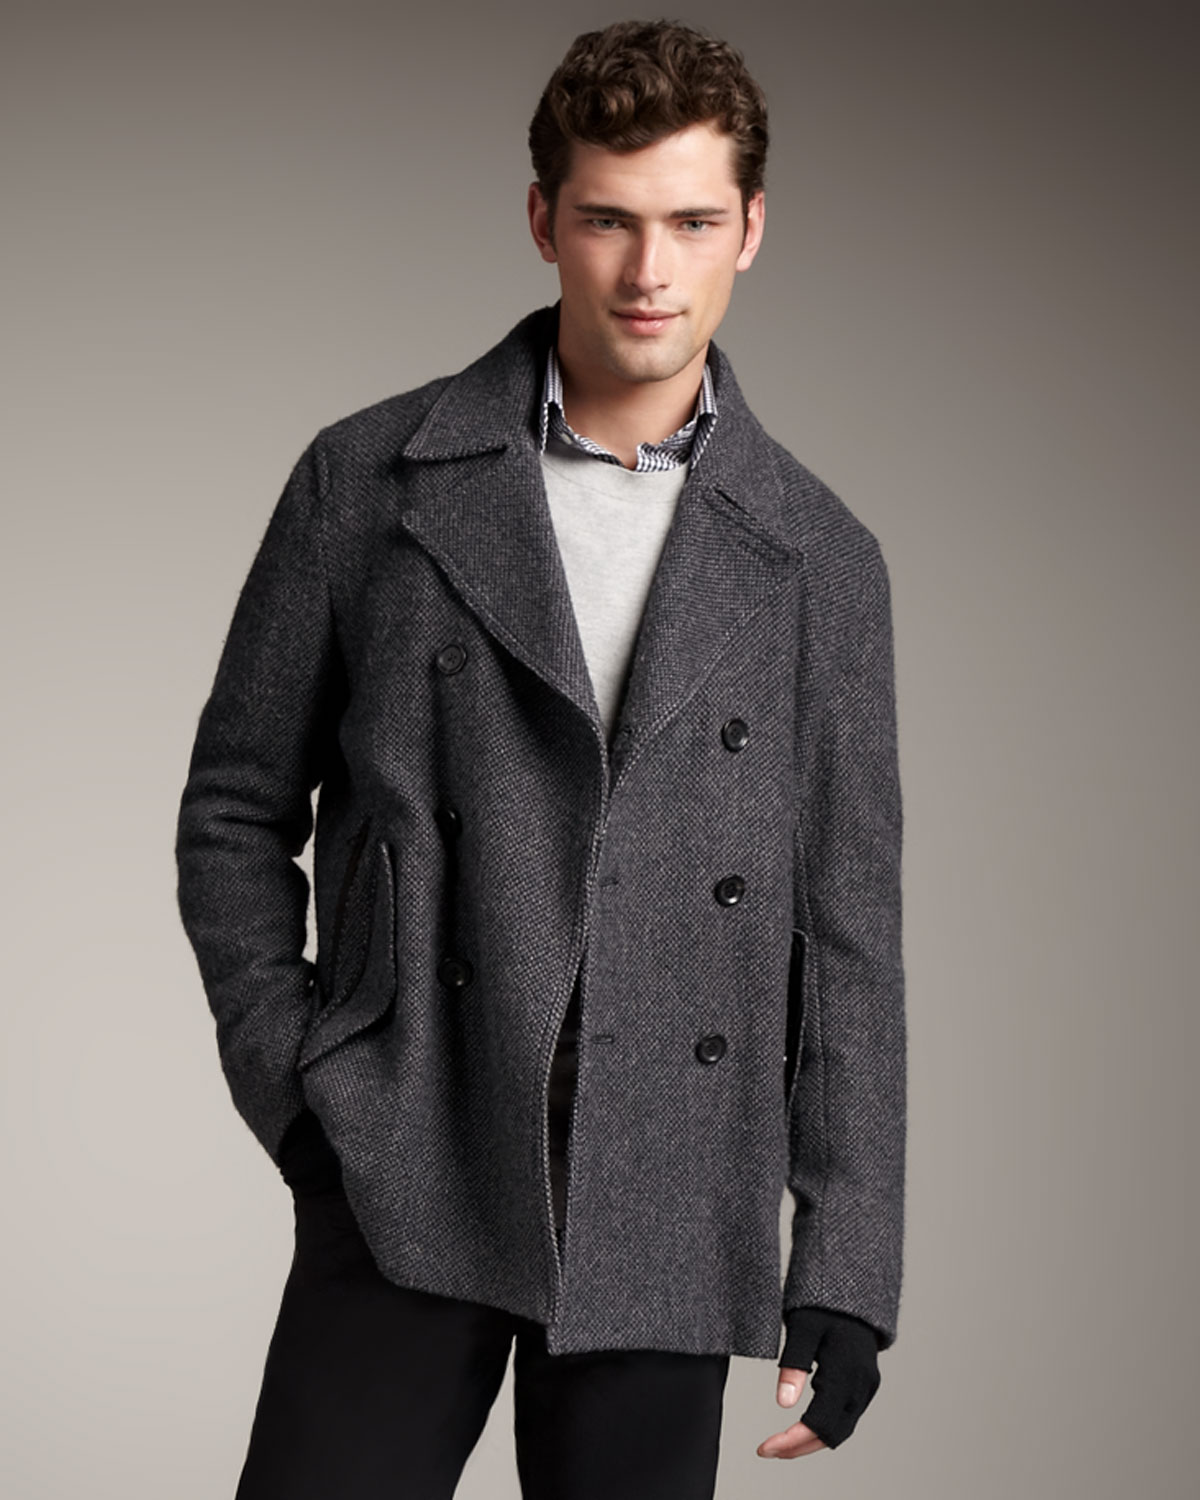 Theory Wool Pea Coat in Charcoal (Gray) for Men - Lyst